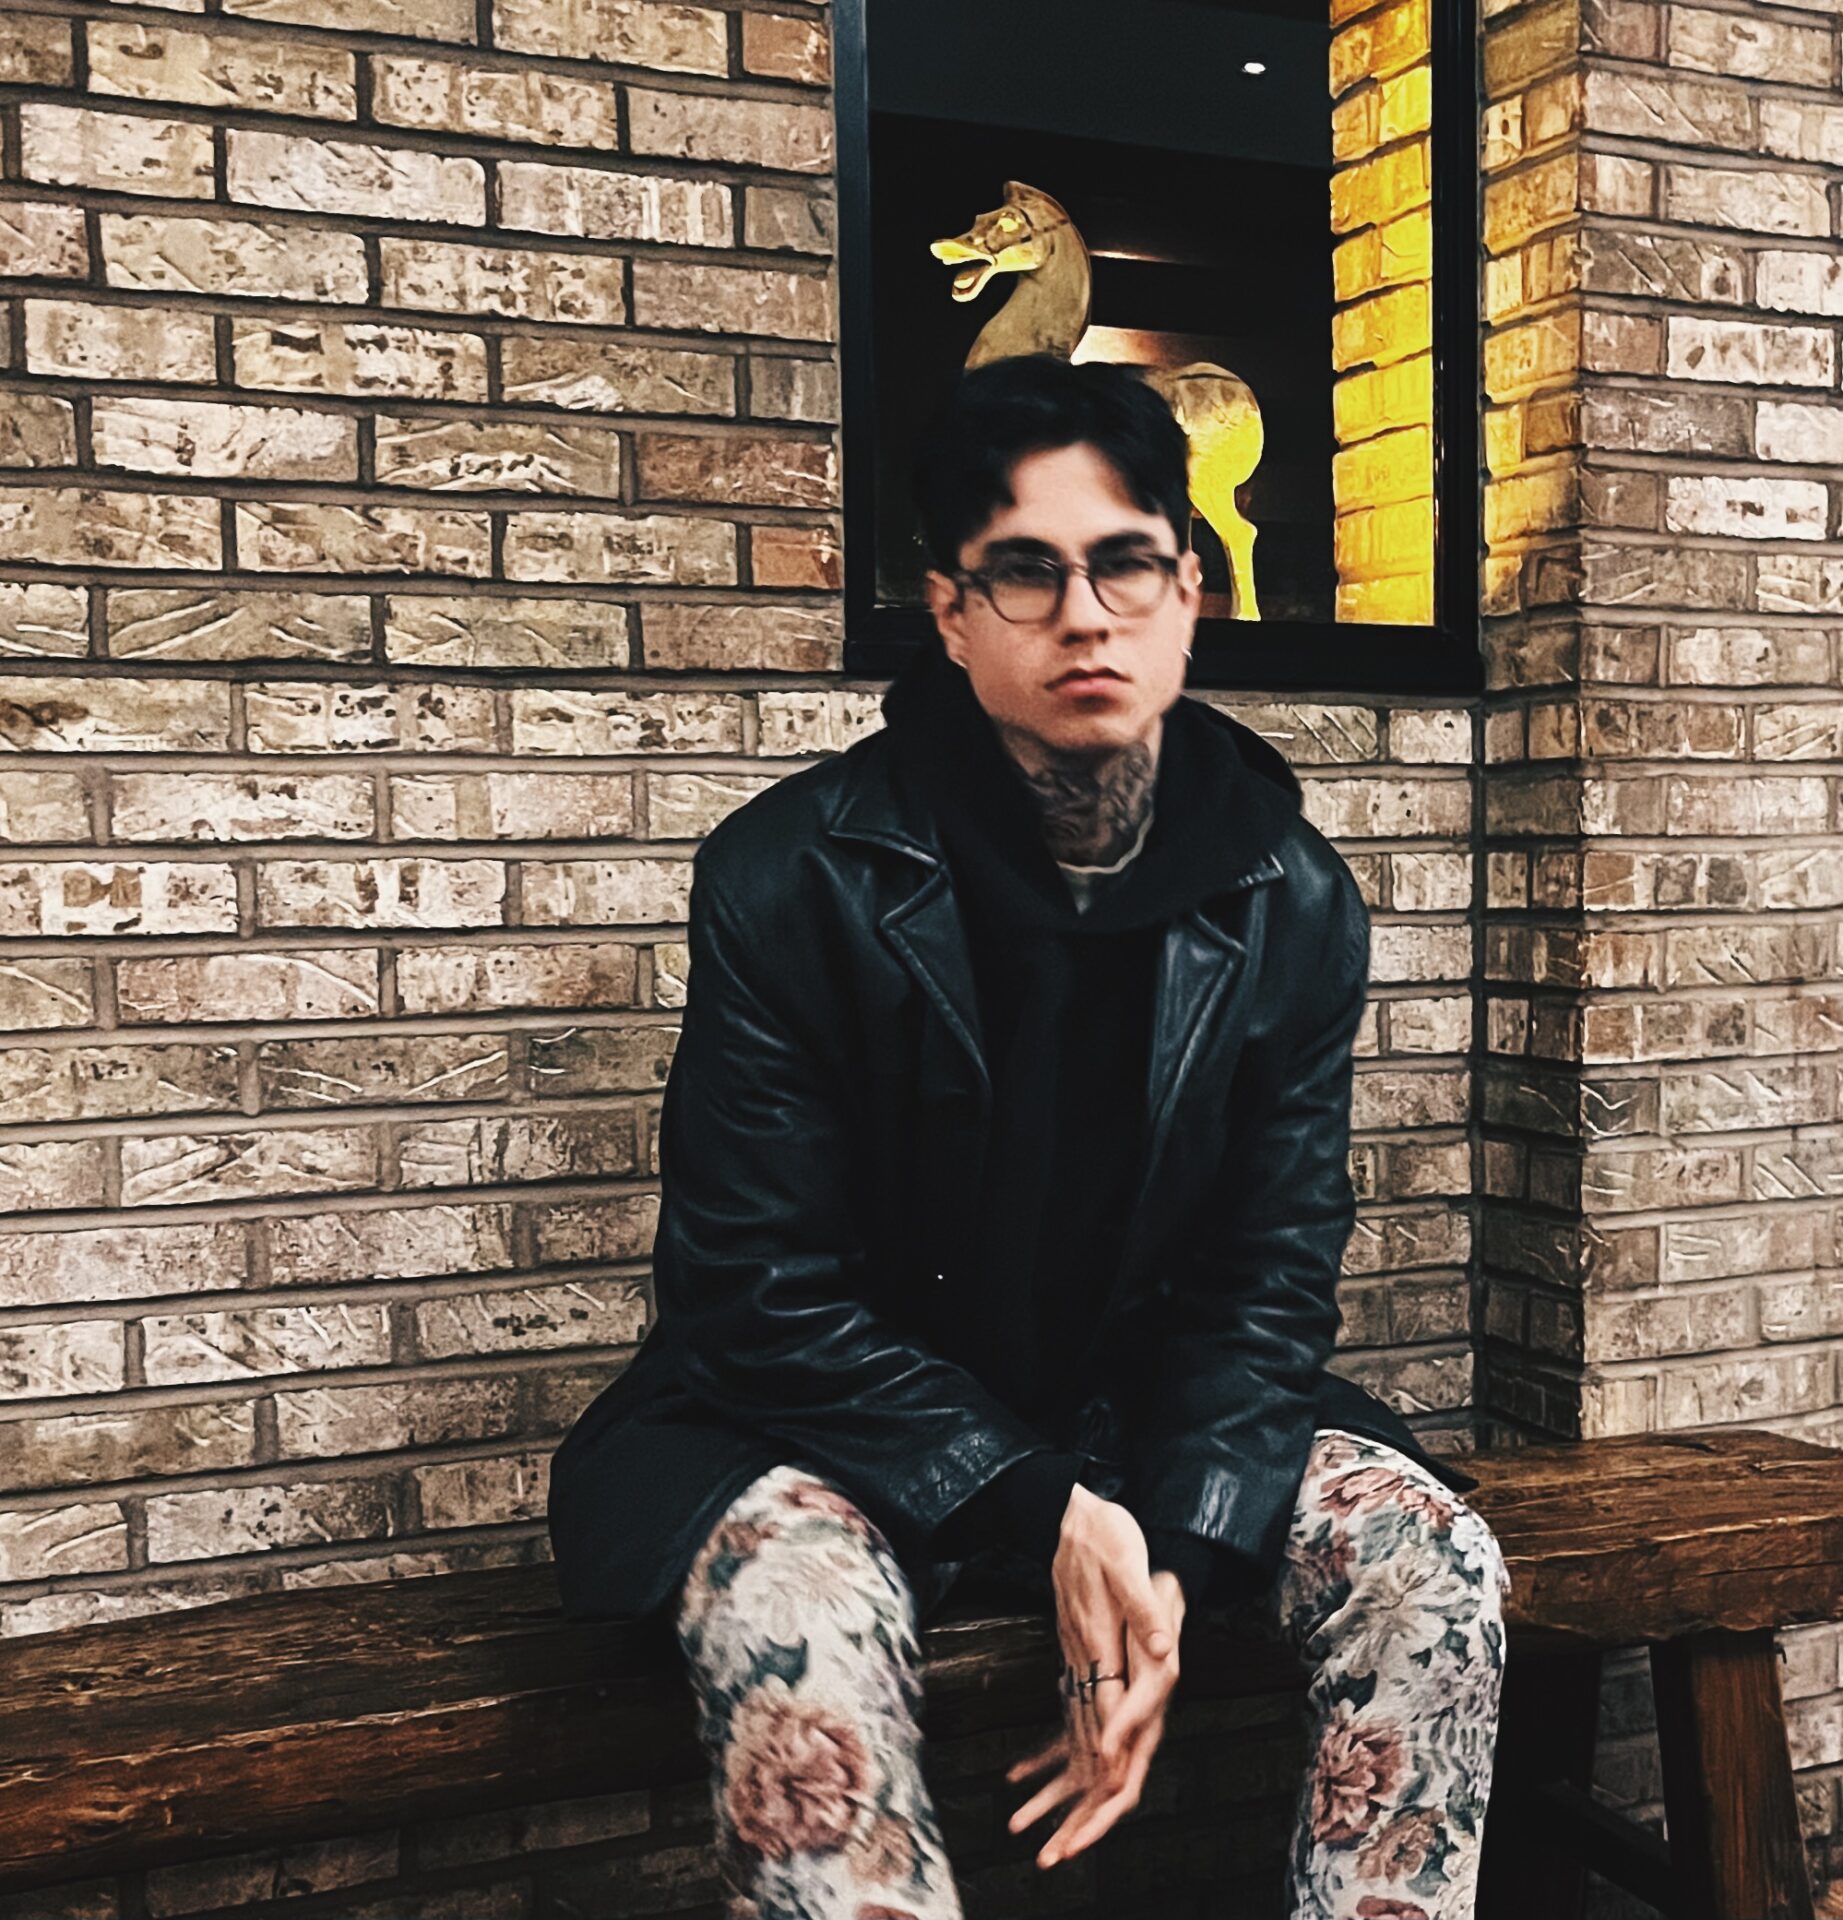 Ruben Rojas released a new cover of "Heart-Shaped Box" by Nirvana